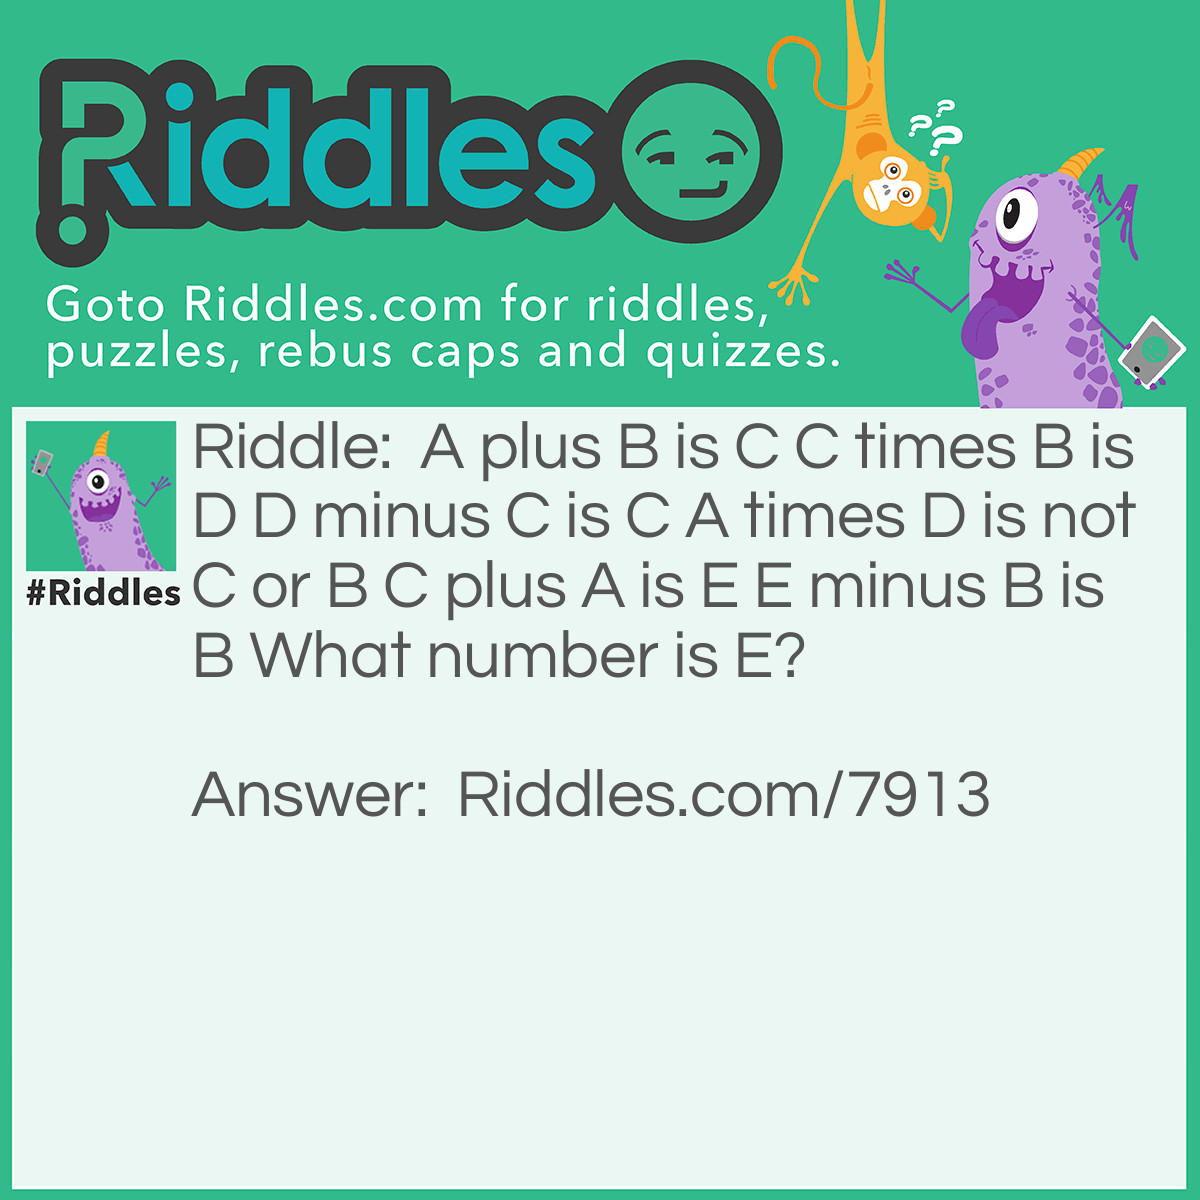 Riddle: A plus B is C C times B is D D minus C is C A times D is not C or B C plus A is E E minus B is B What number is E? Answer: 4.